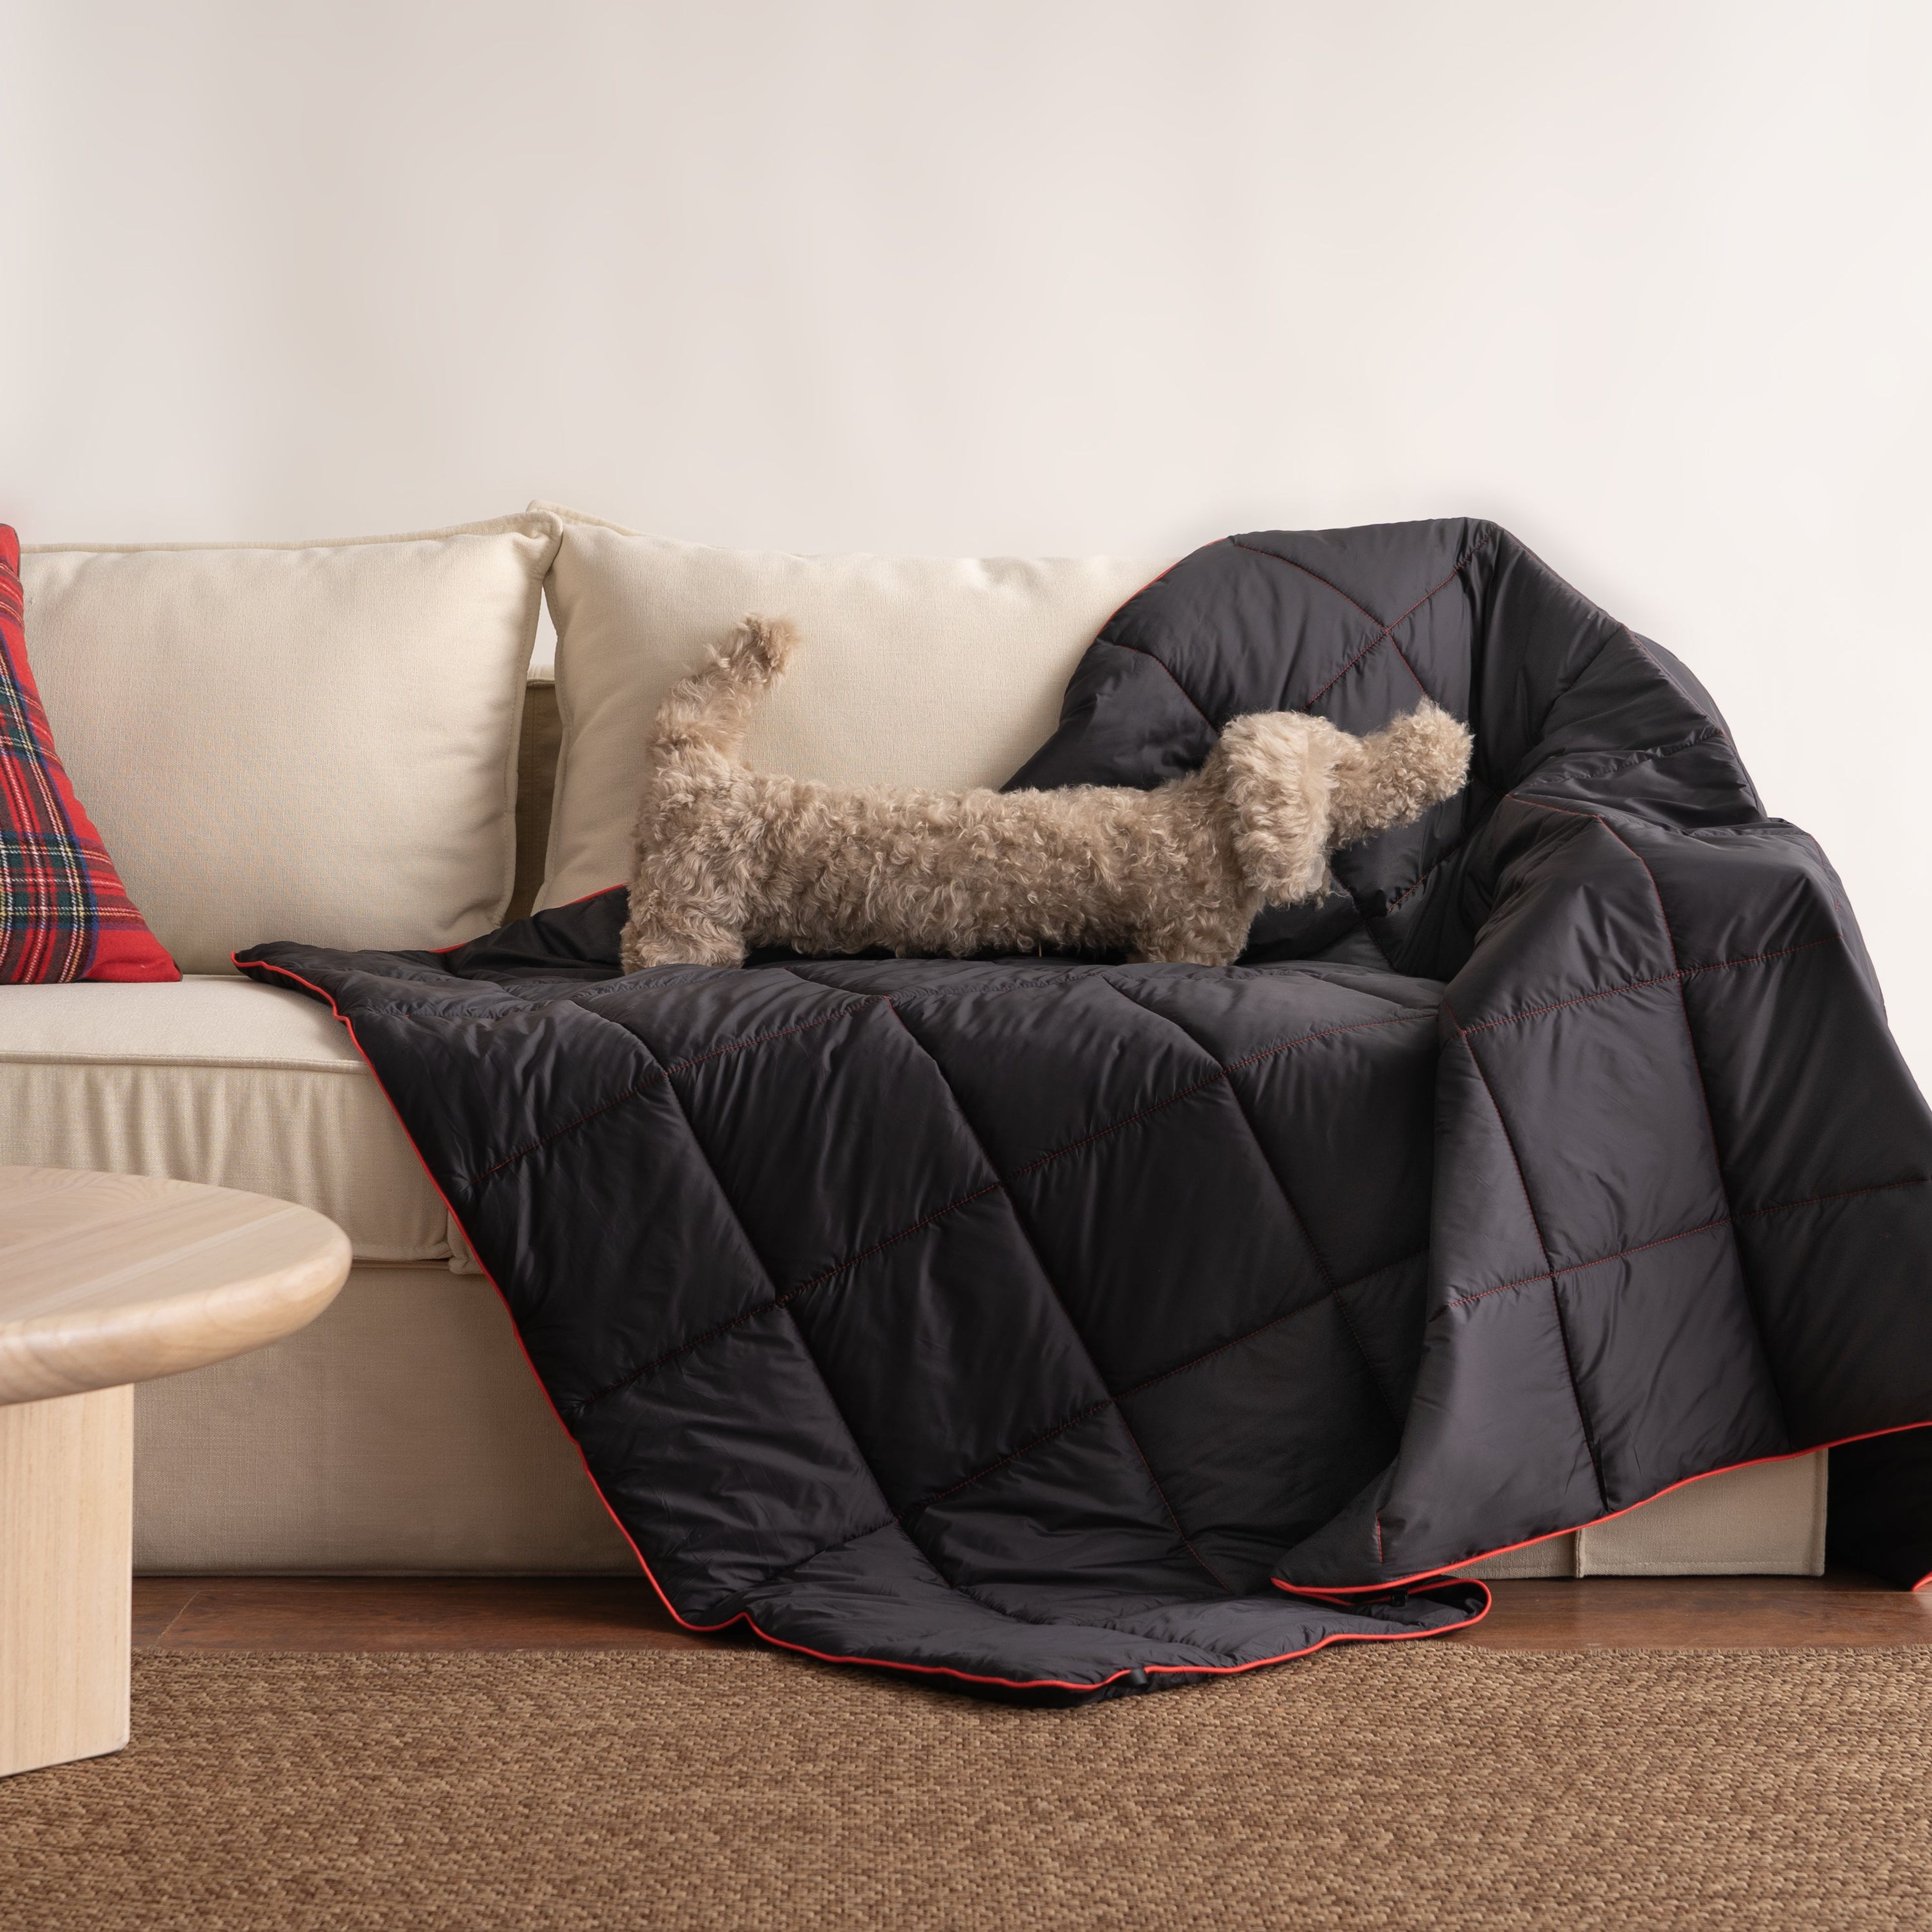 Portable Couch Throw/Blanket – Lightweight and Water-Resistant